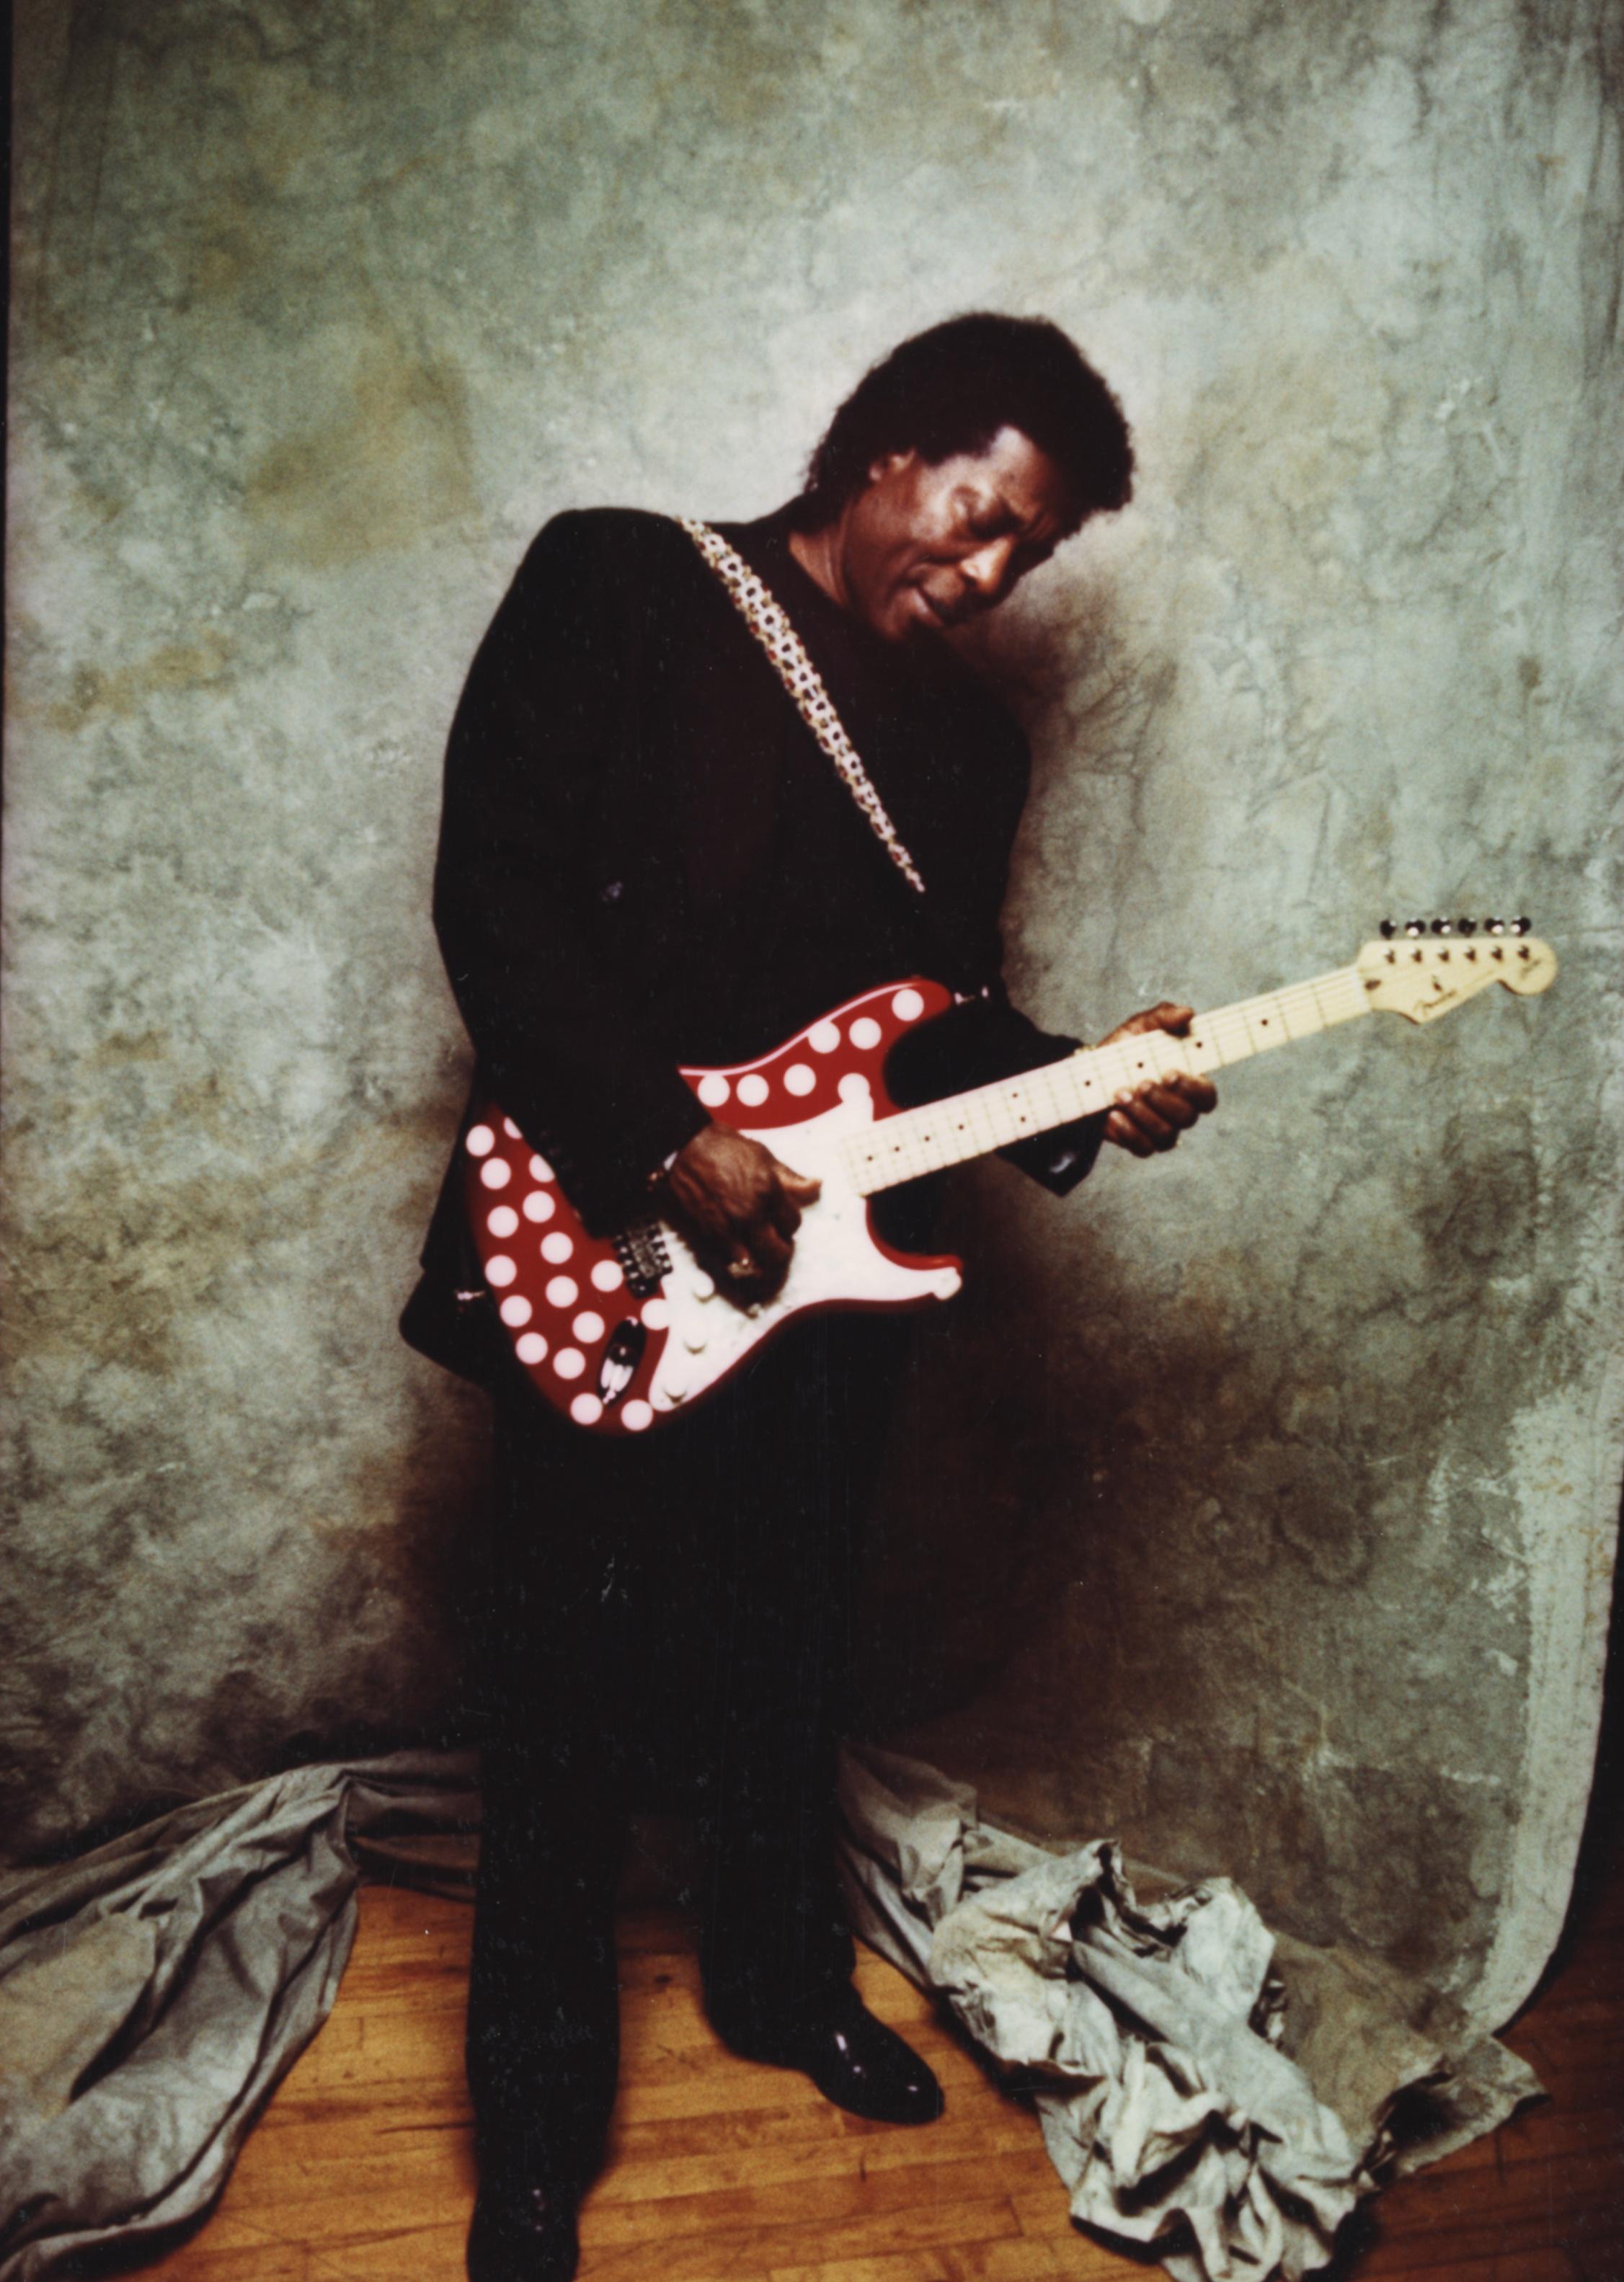 buddy guy against a backdrop playing a red guitar with white dots